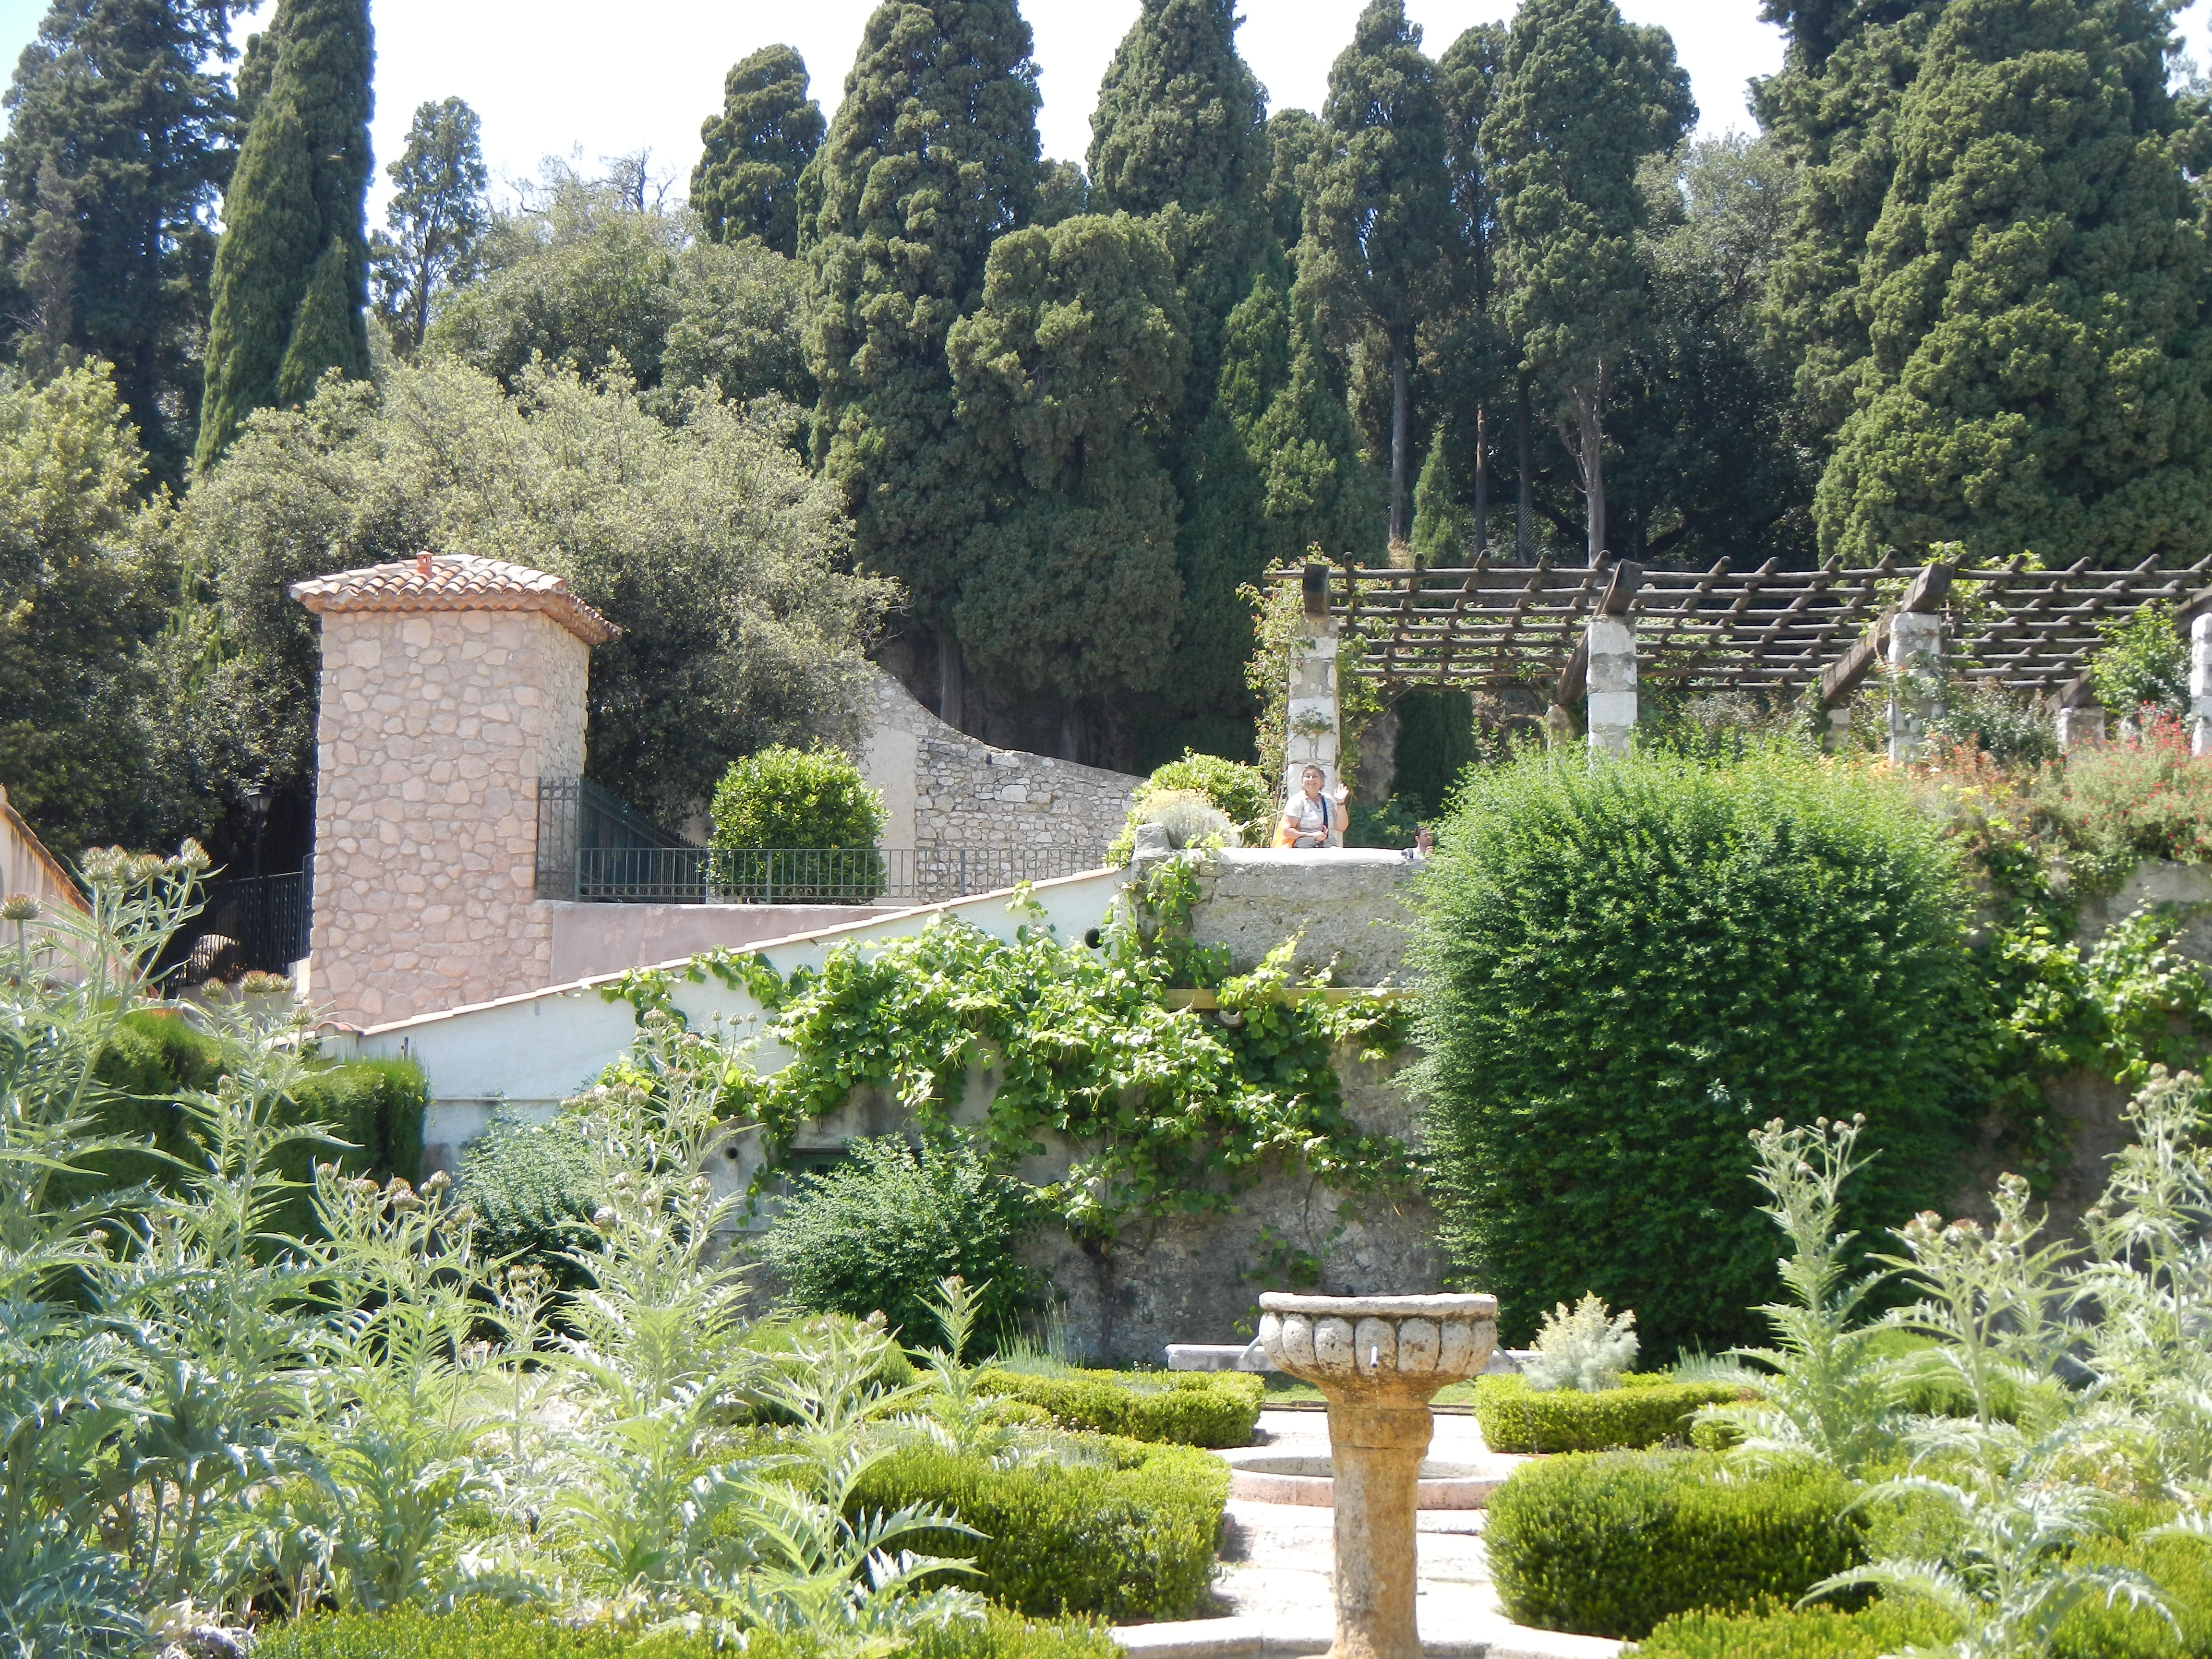 Walled Herb Garden, Simiez Monastery outside of Nice